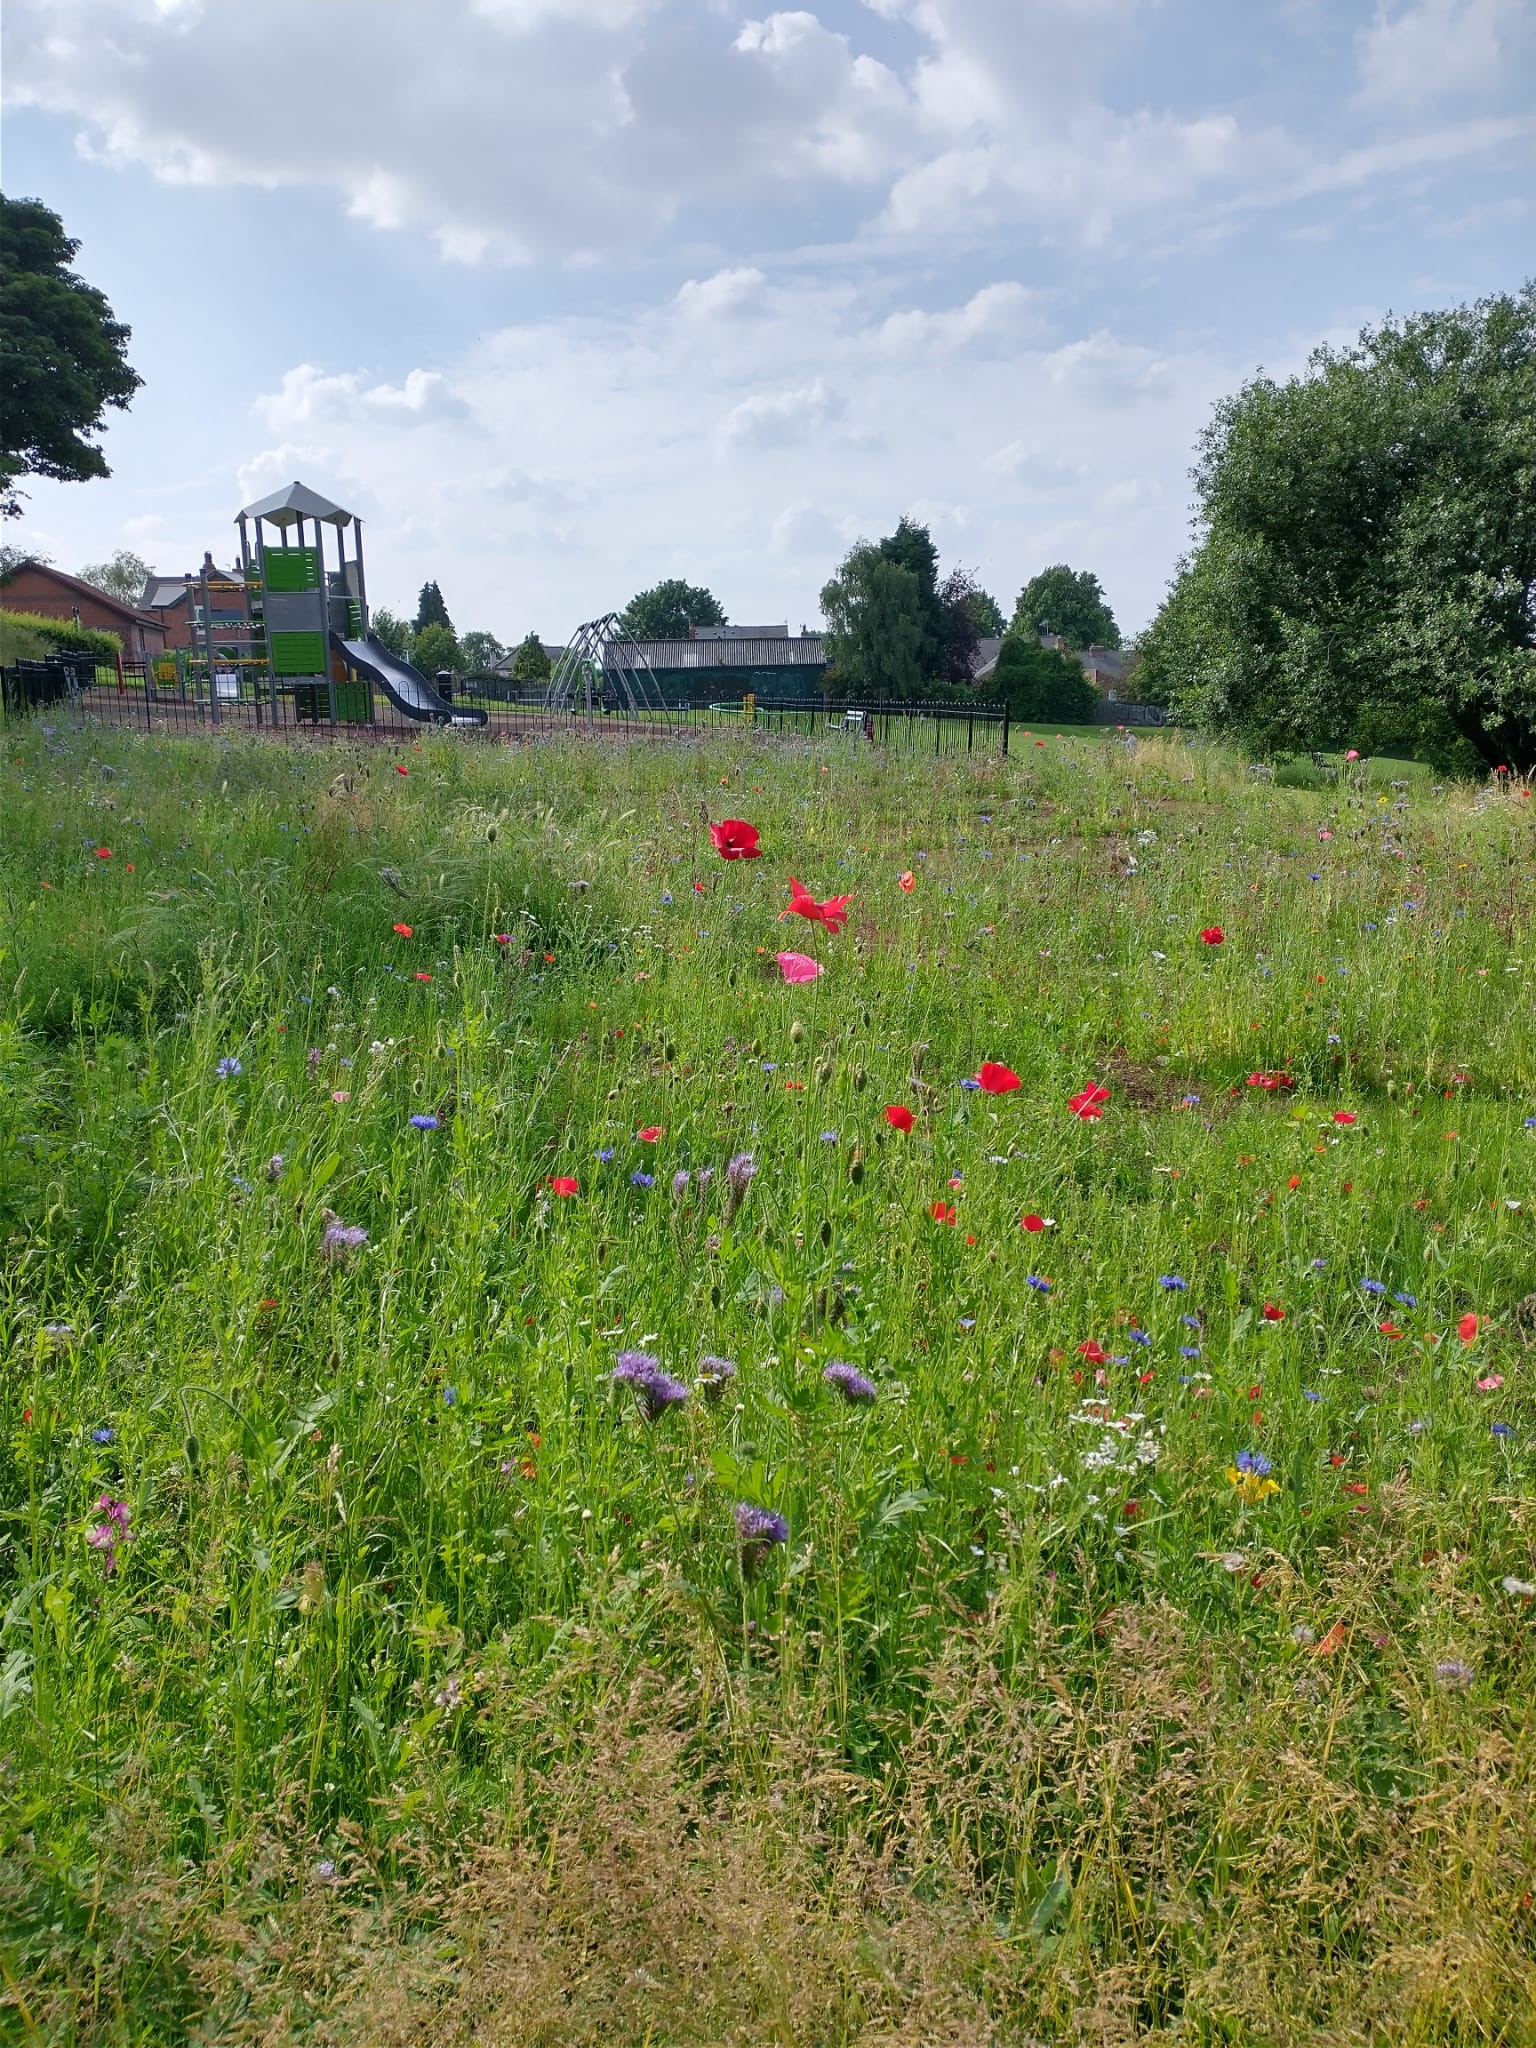 A photo of Breck Hill Park. The play area is at the back of the photo and a forefront of red and purple wildflowers fill a large grassy area.